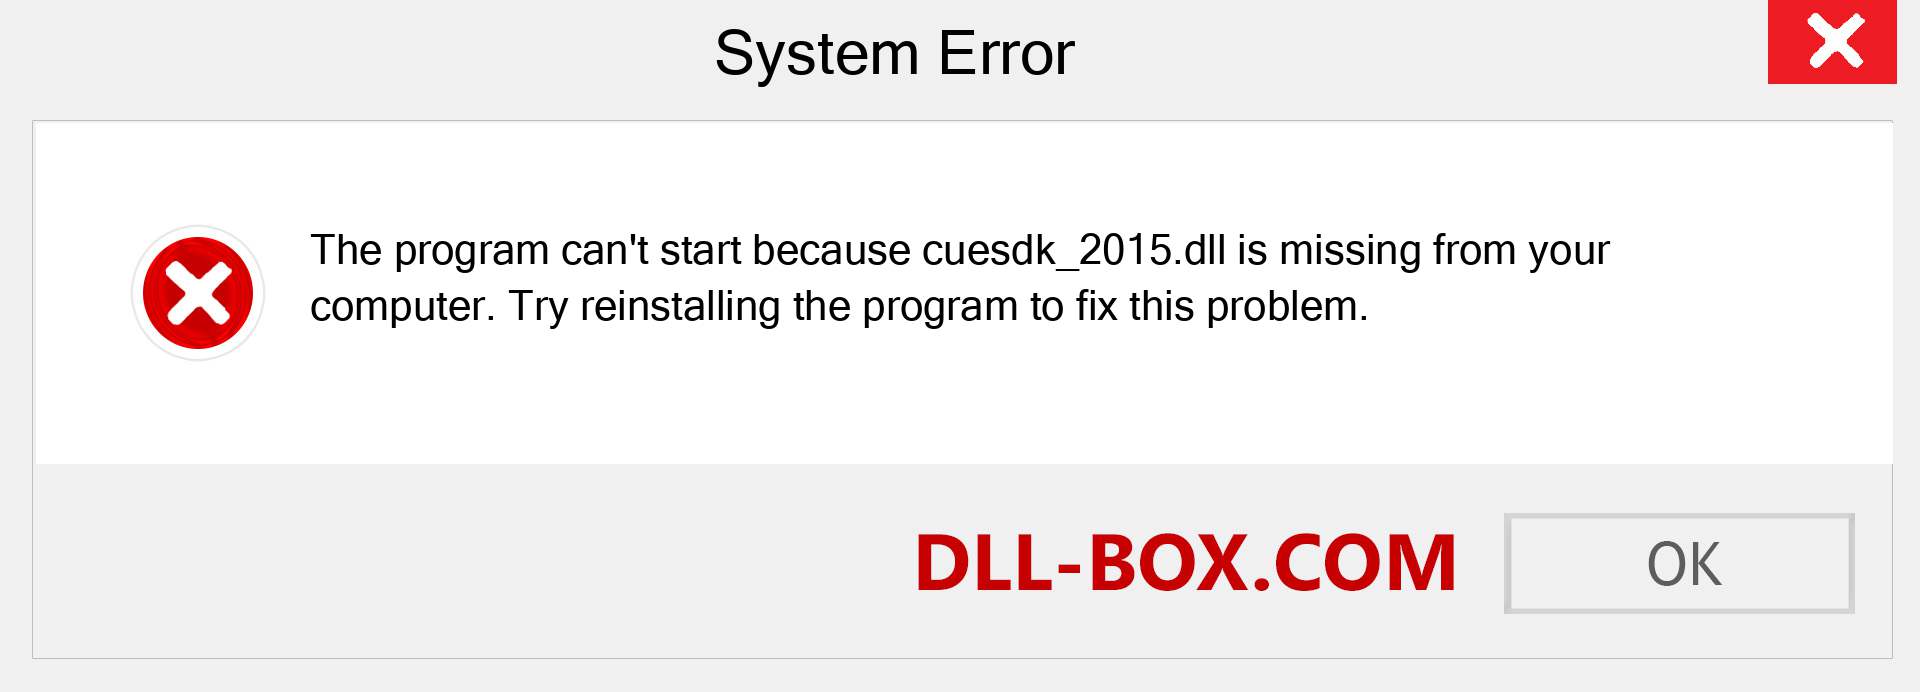  cuesdk_2015.dll file is missing?. Download for Windows 7, 8, 10 - Fix  cuesdk_2015 dll Missing Error on Windows, photos, images